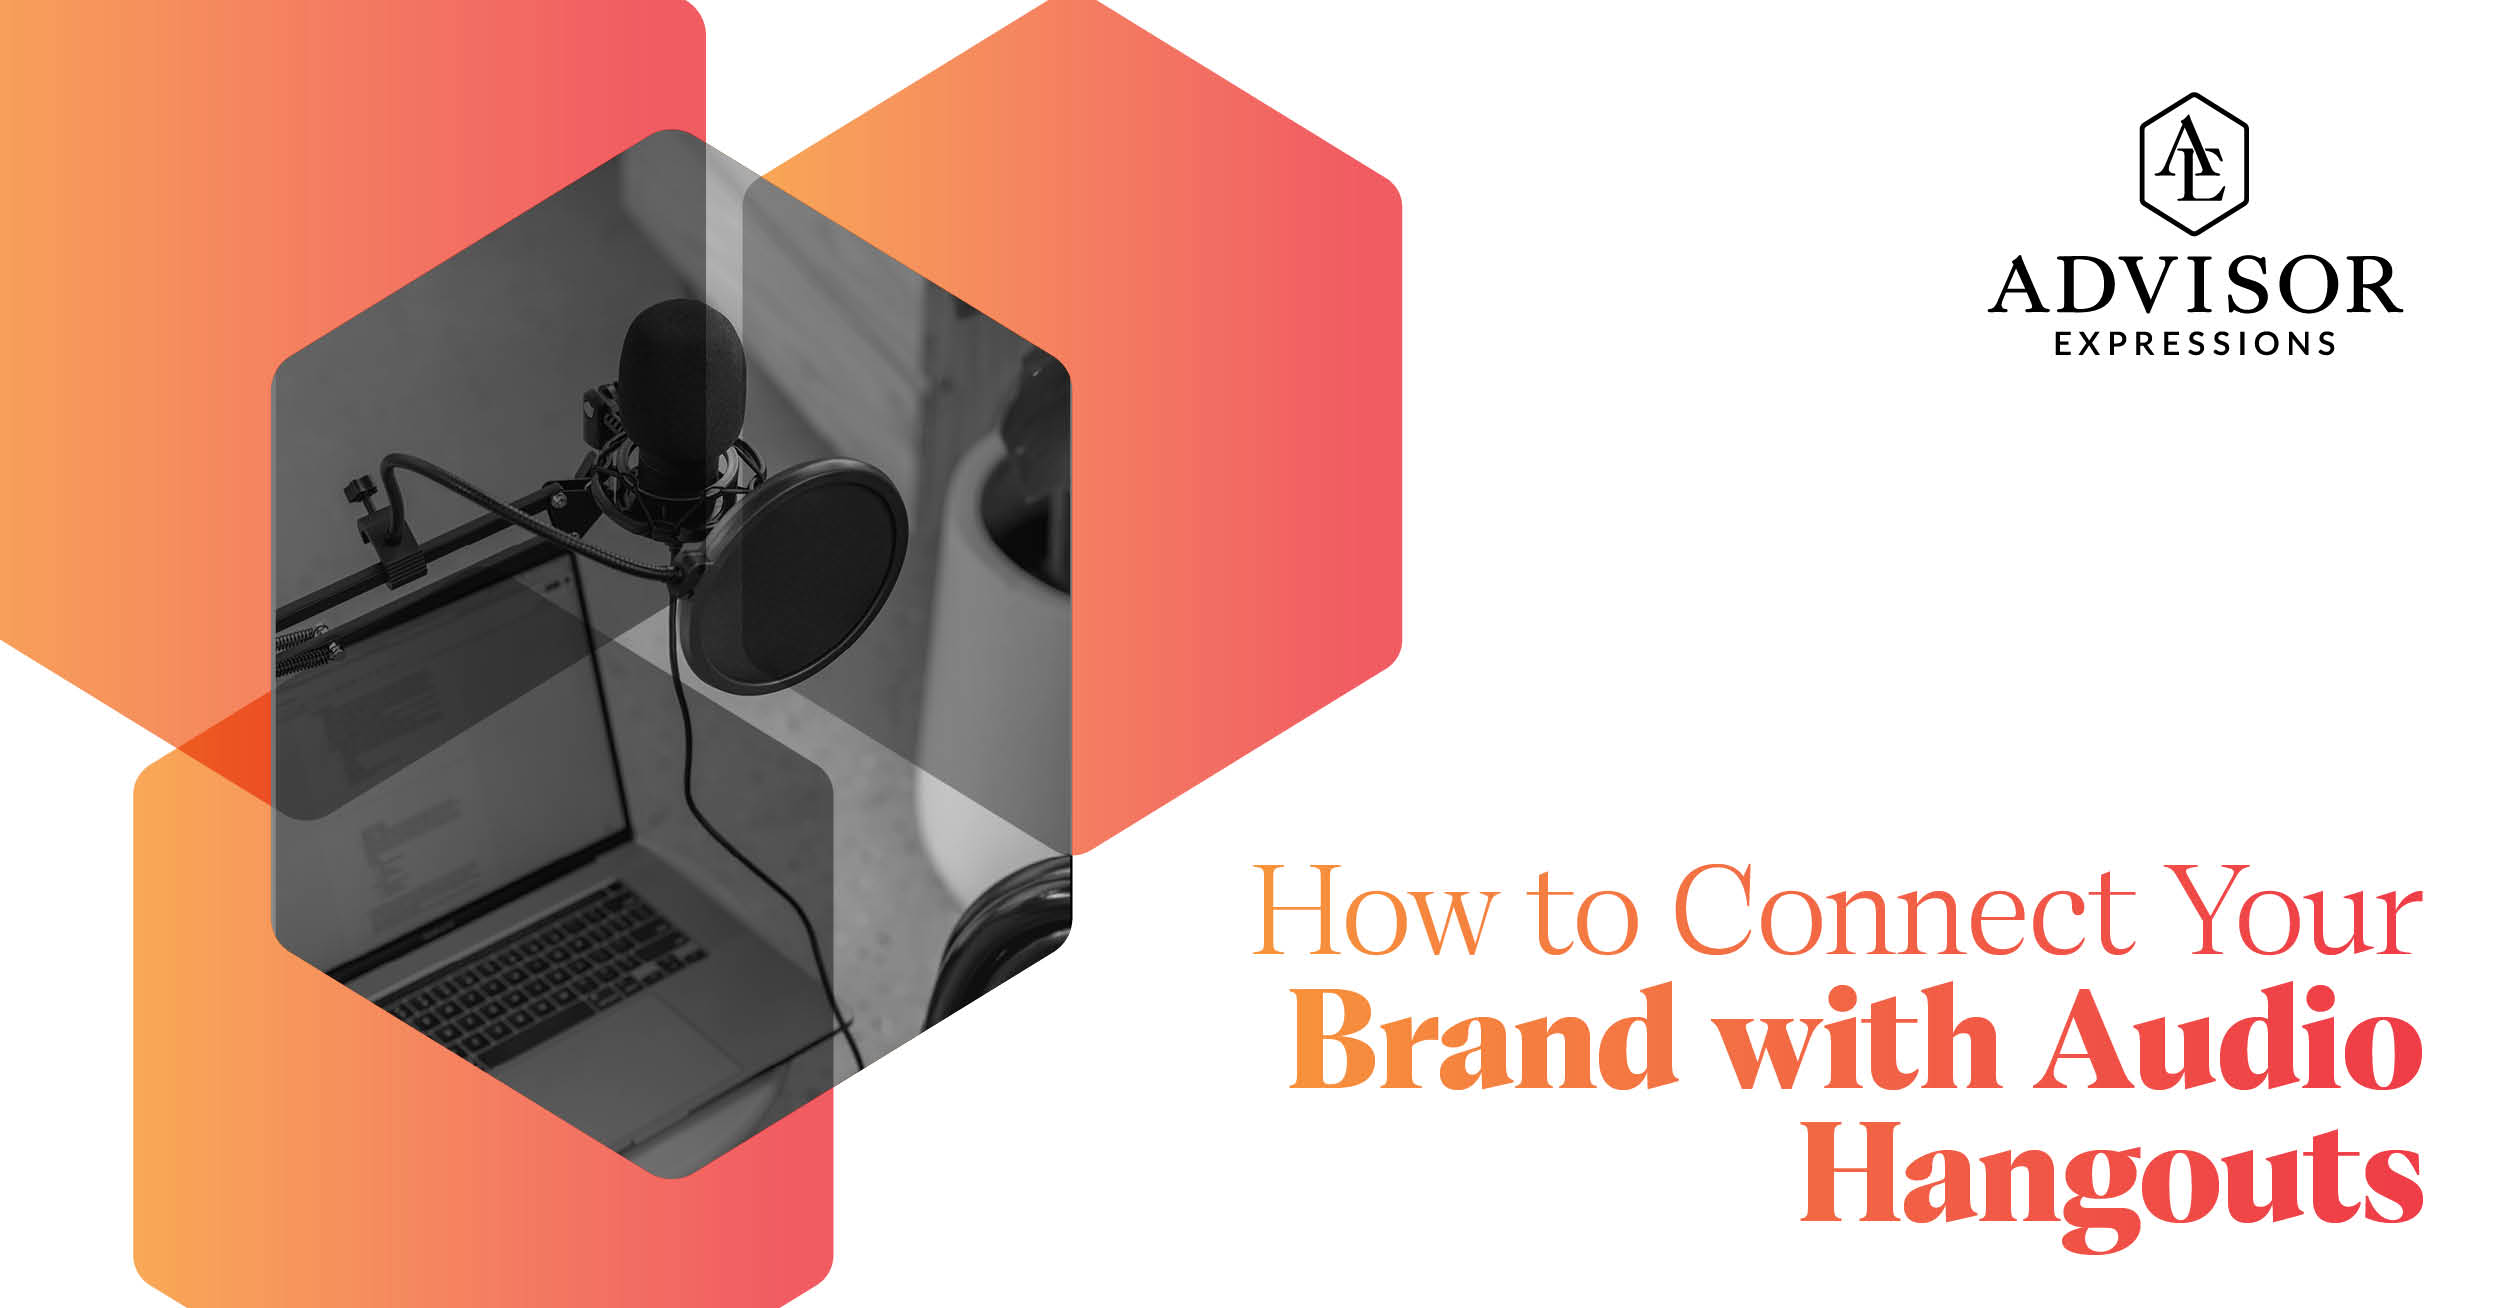 How to Connect Your Brand with Audio Hangouts